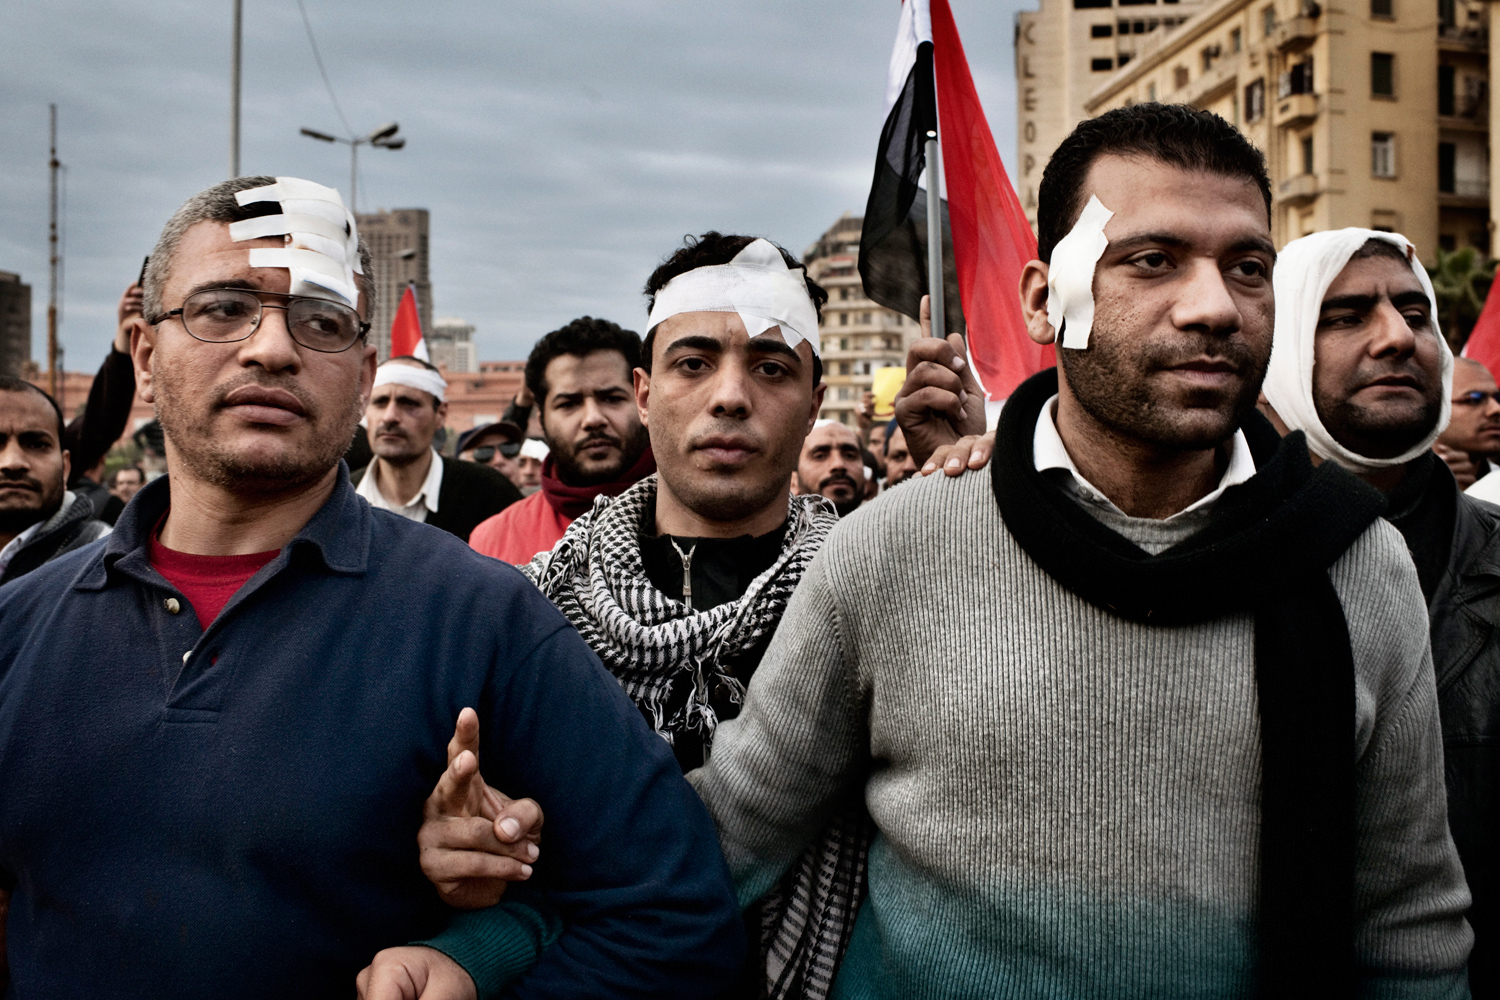 Cairo, Egypt — February 4, 2011
                              Wounded anti-government protesters march through Tahrir Square.